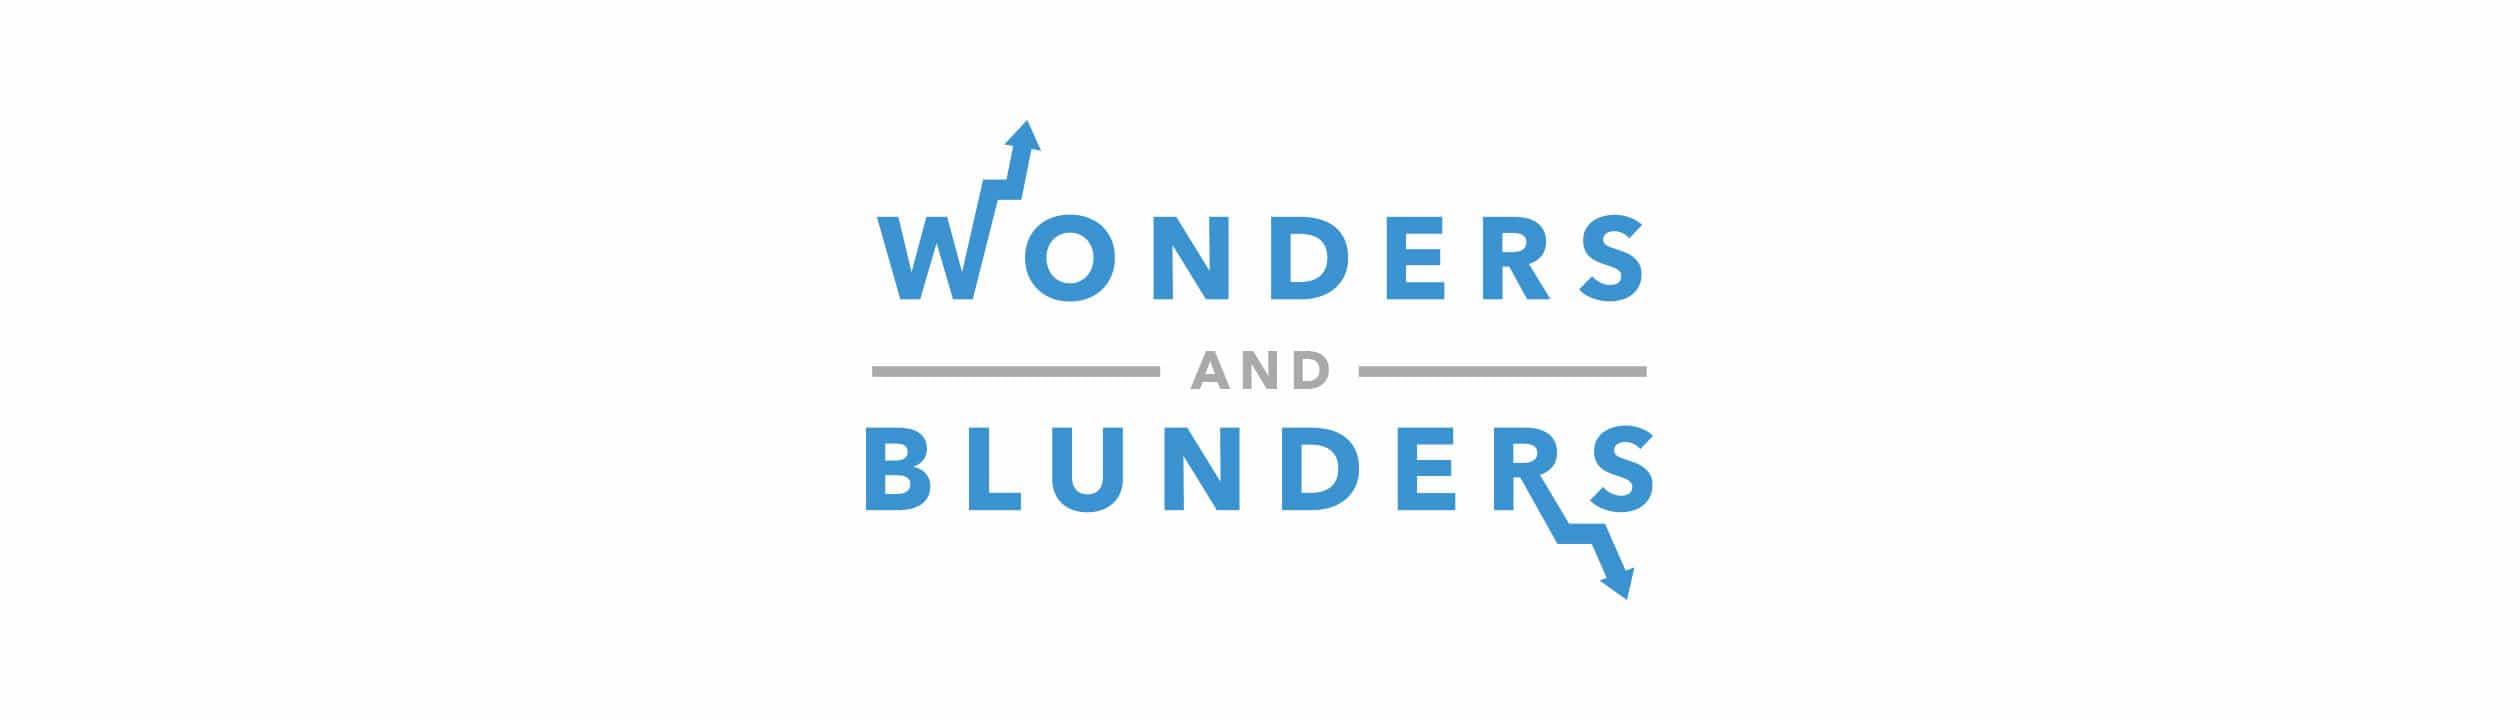 Wonders & Blunders: Bitcoin Index Funds and Blockchain Banking